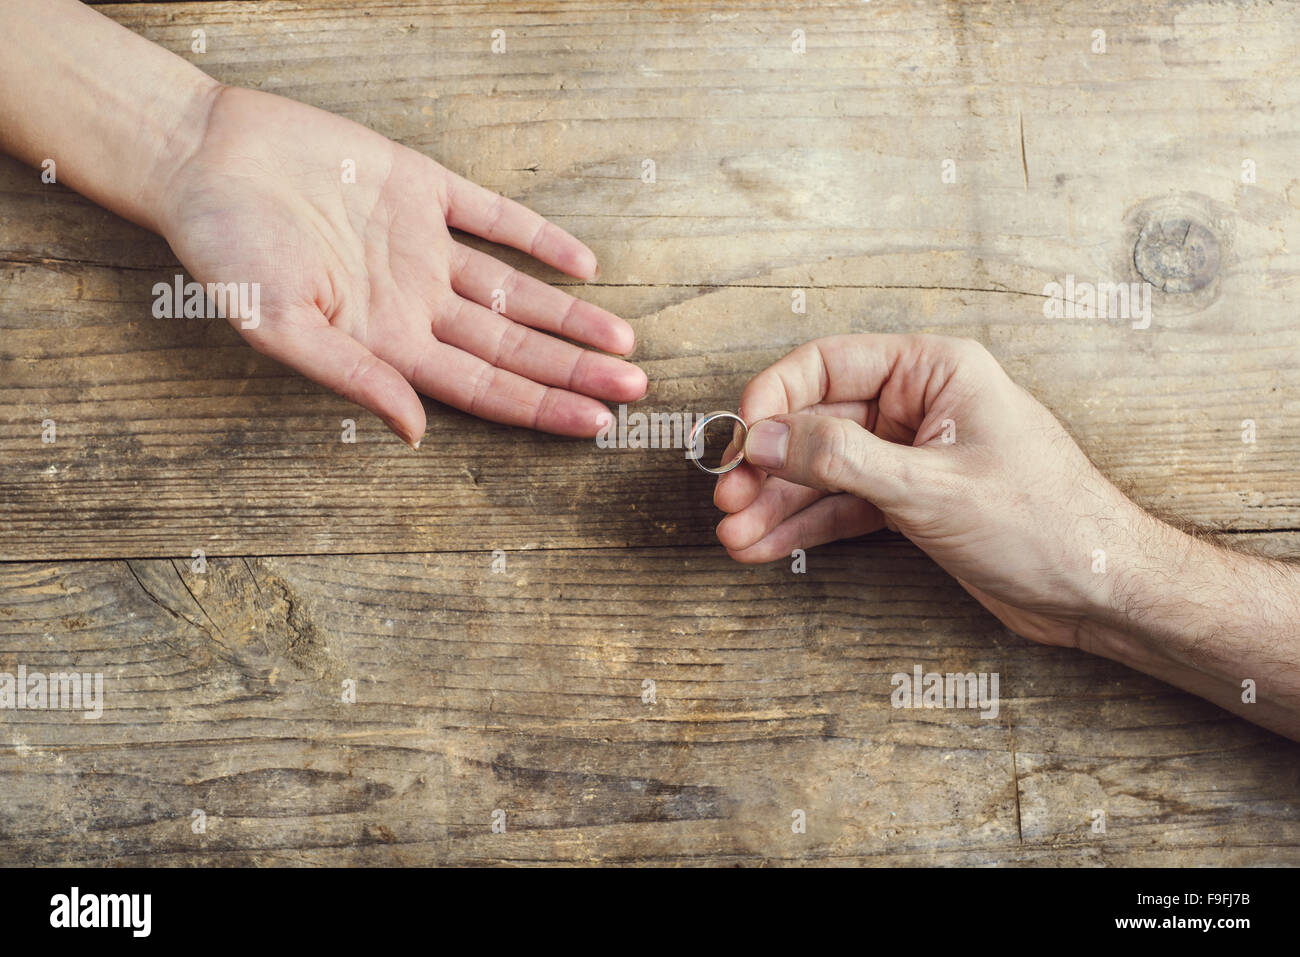 Man offering a wedding ring tenderly to a woman. Studio shot on a wooden background, view from above. Stock Photo